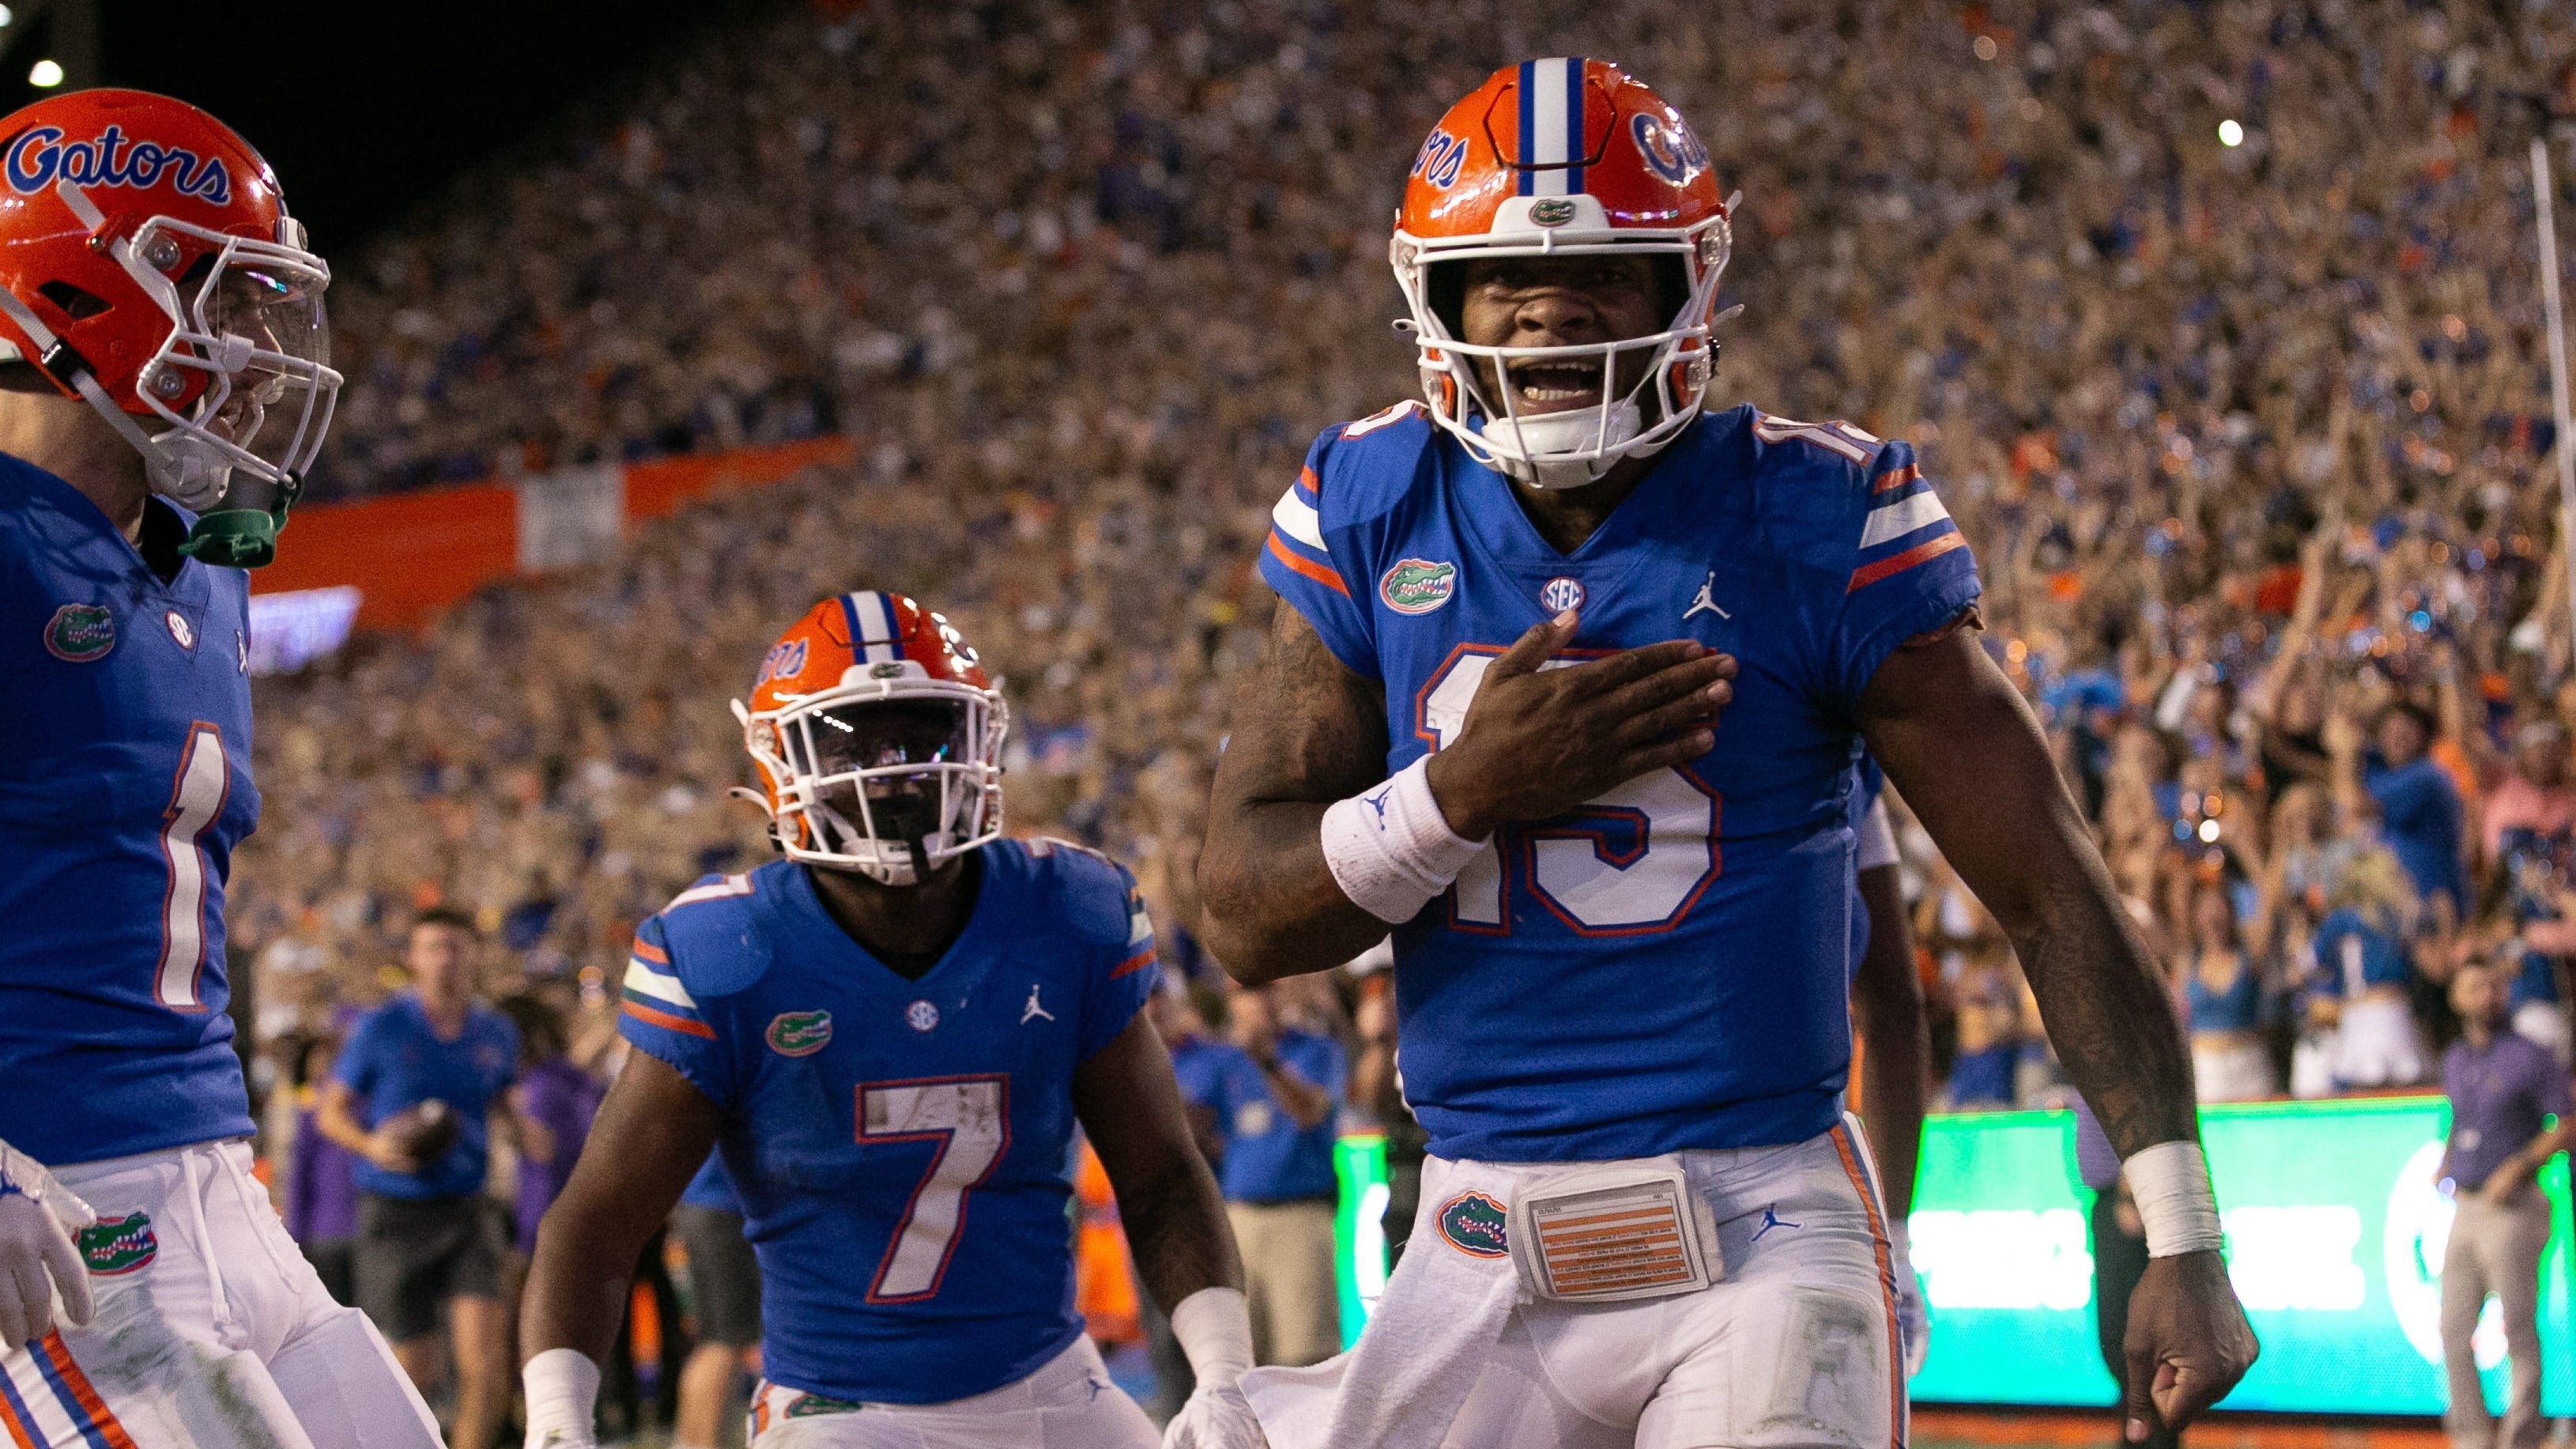 Florida Gators quarterback Anthony Richardson (15) celebrates after diving into the end zone for a touchdown in the second half against LSU at Steve Spurrier Field at Ben Hill Griffin Stadium in Gainesville, FL on Saturday, October 15, 2022.